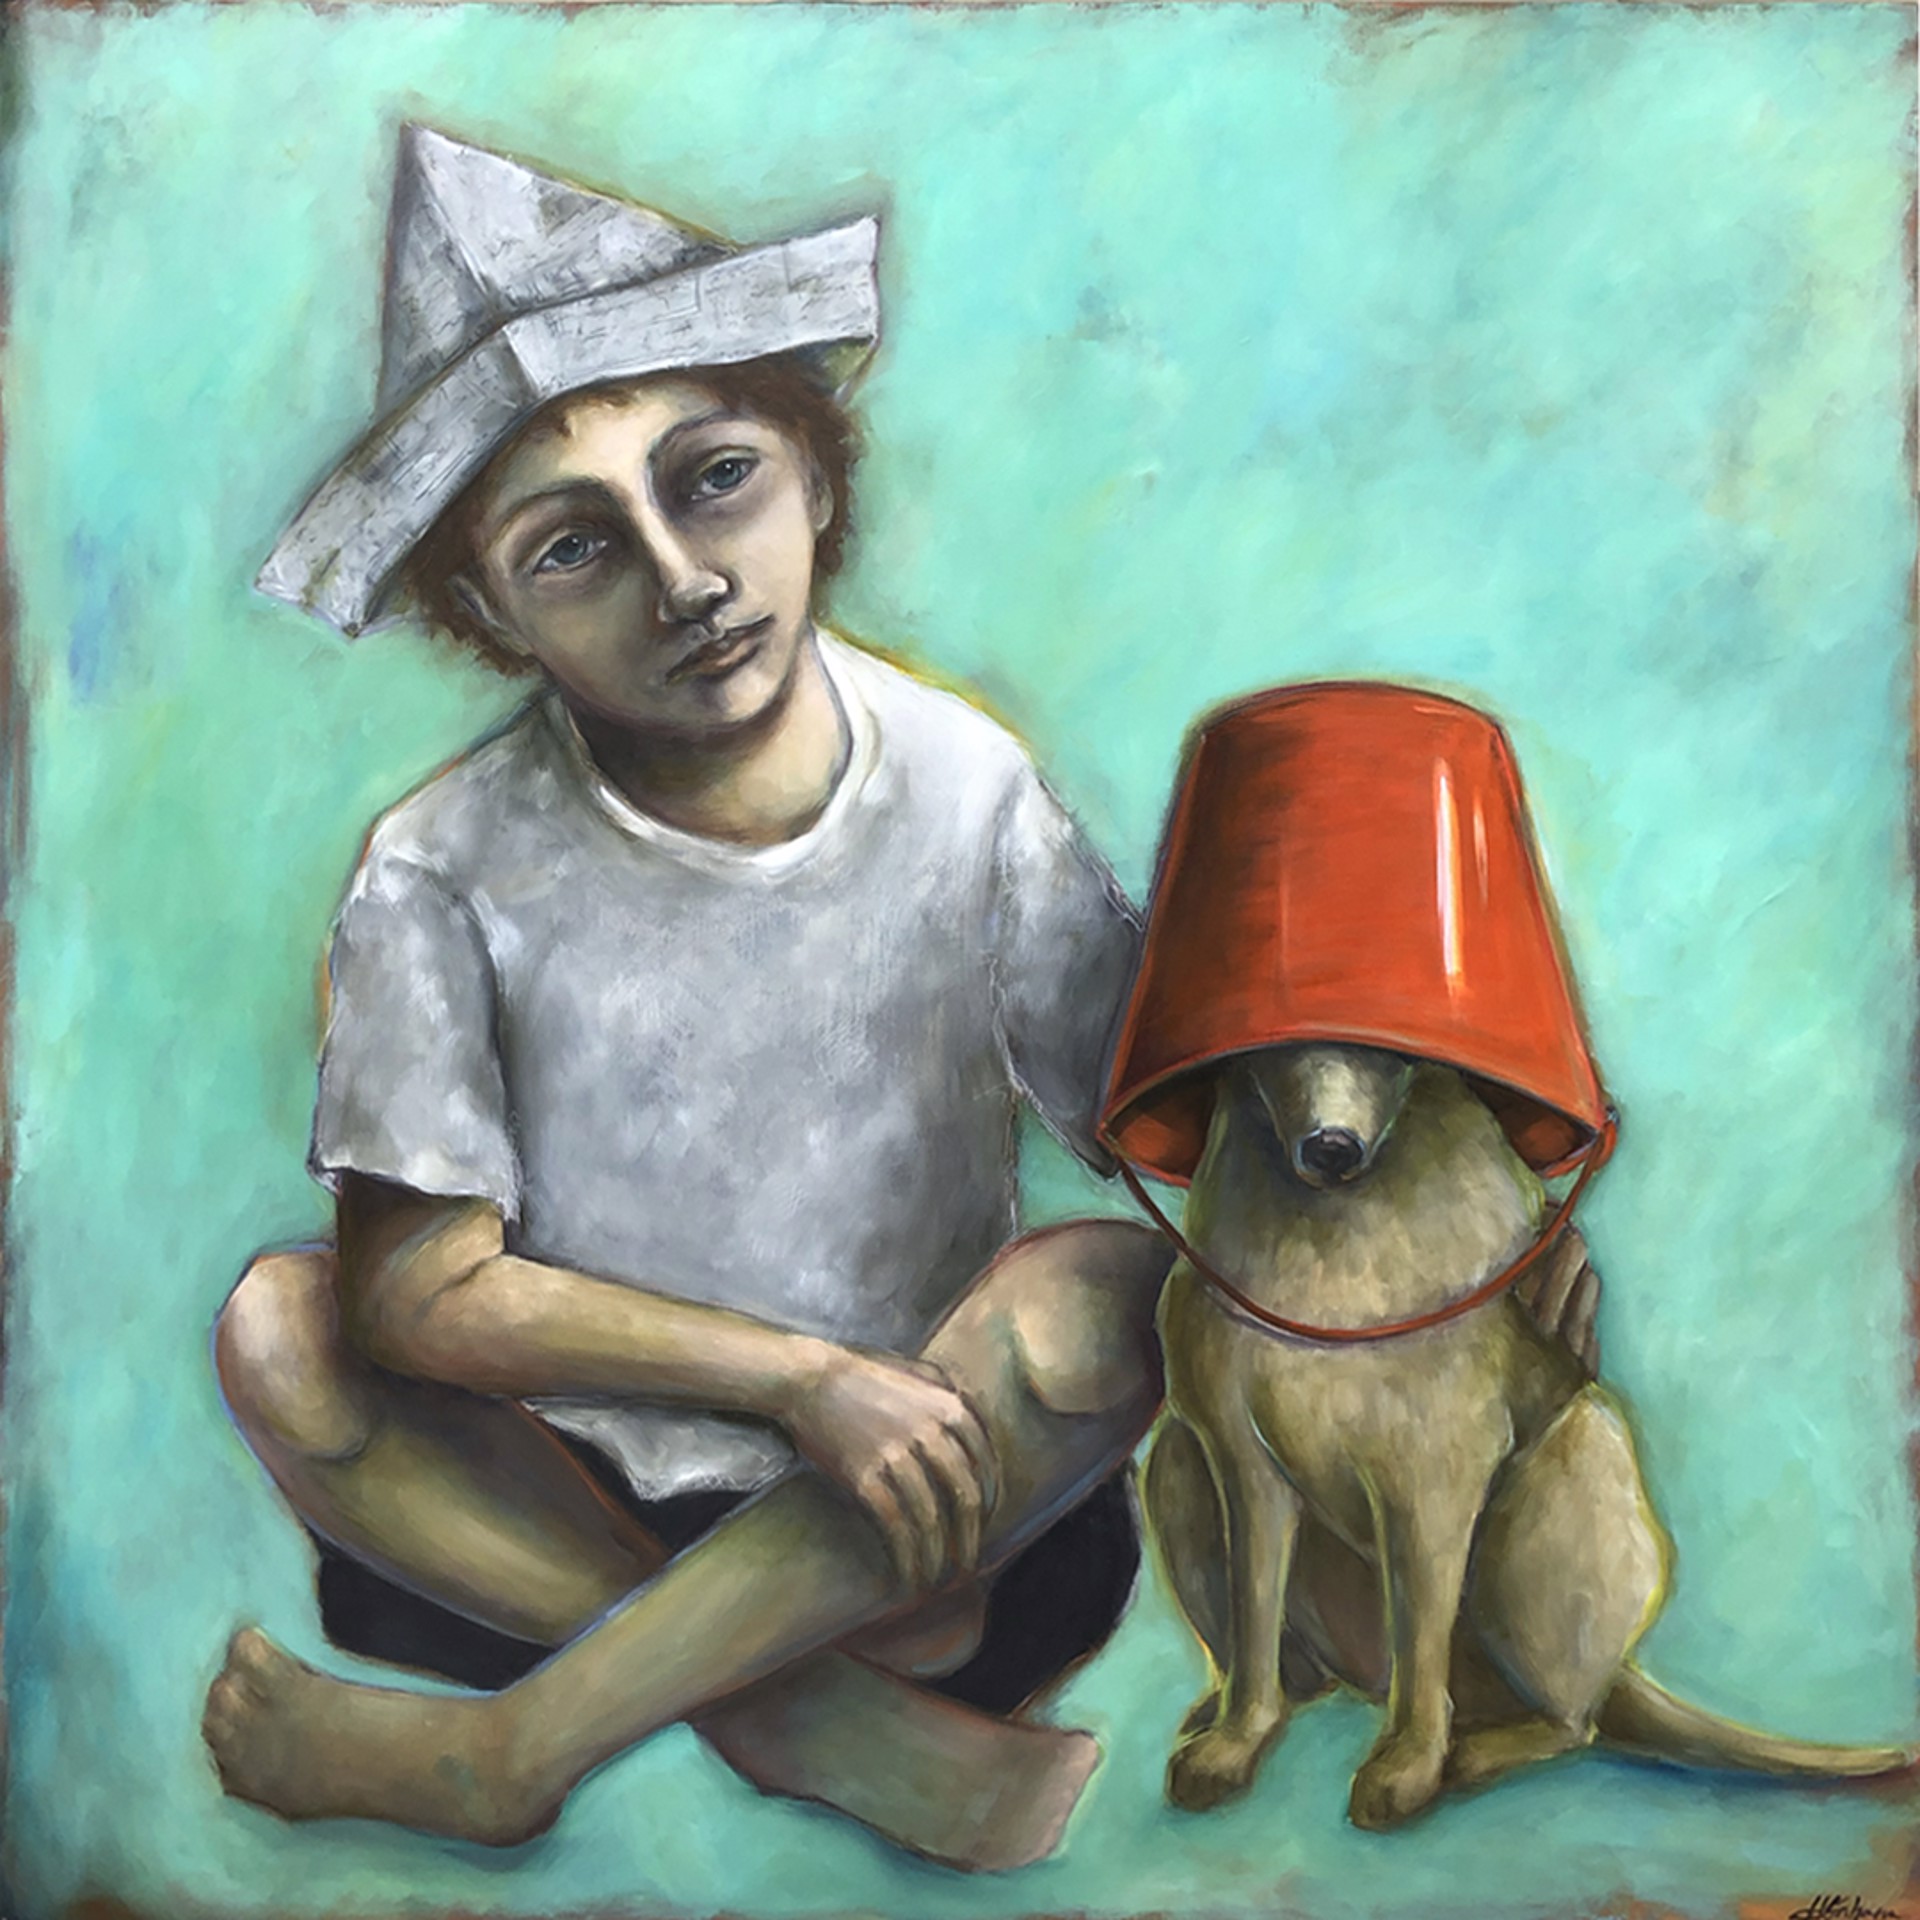 Me and Buckethead by Heather Gorham